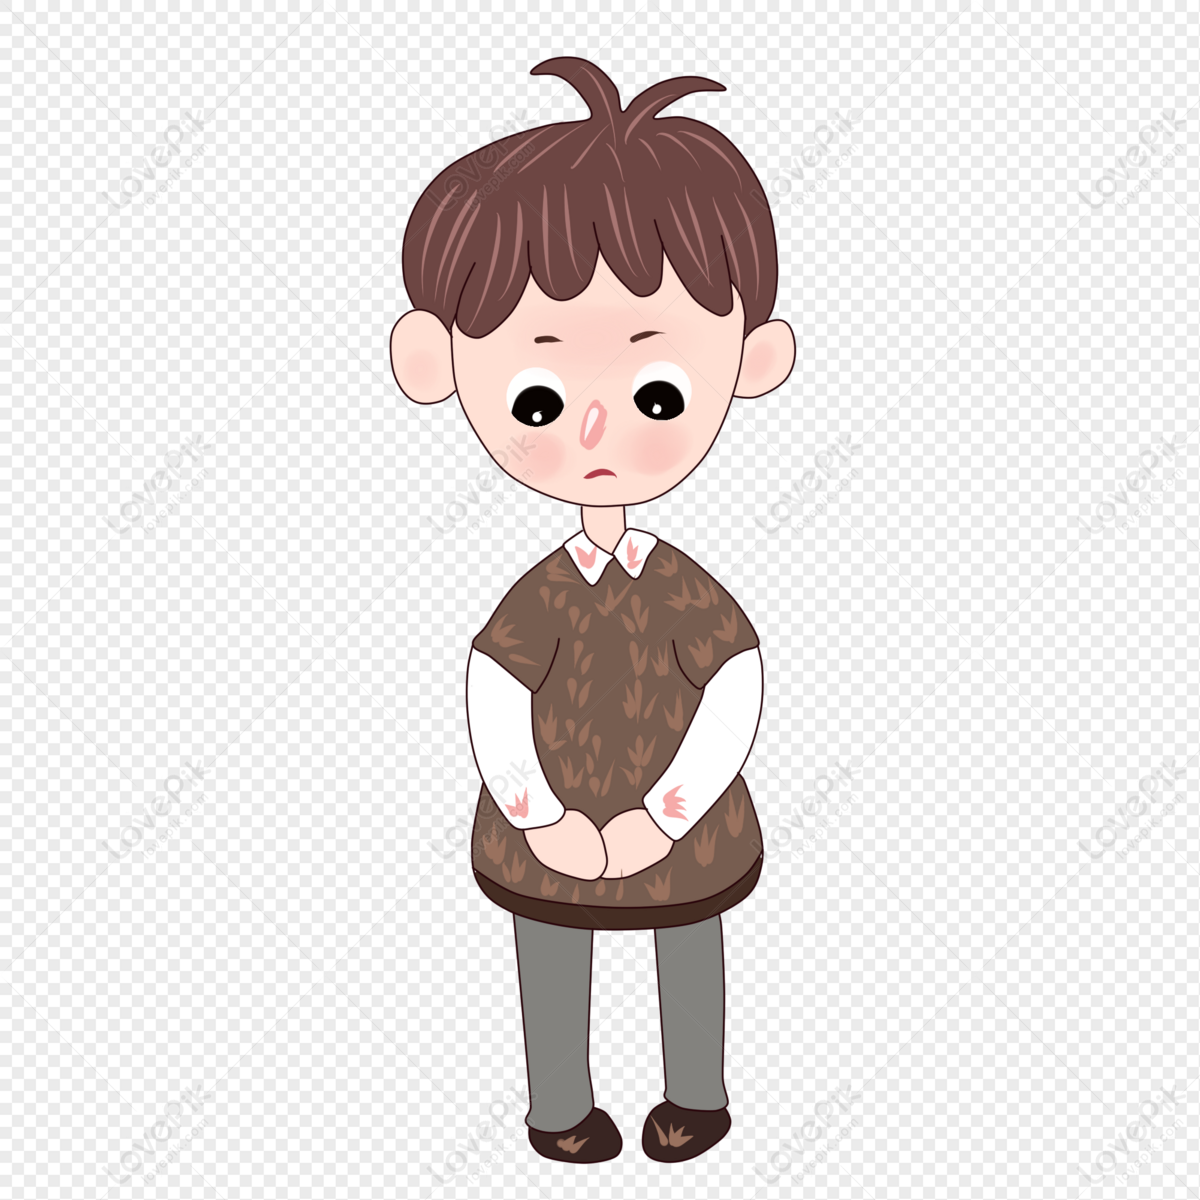 Sad Boy PNG Picture And Clipart Image For Free Download - Lovepik |  401302755